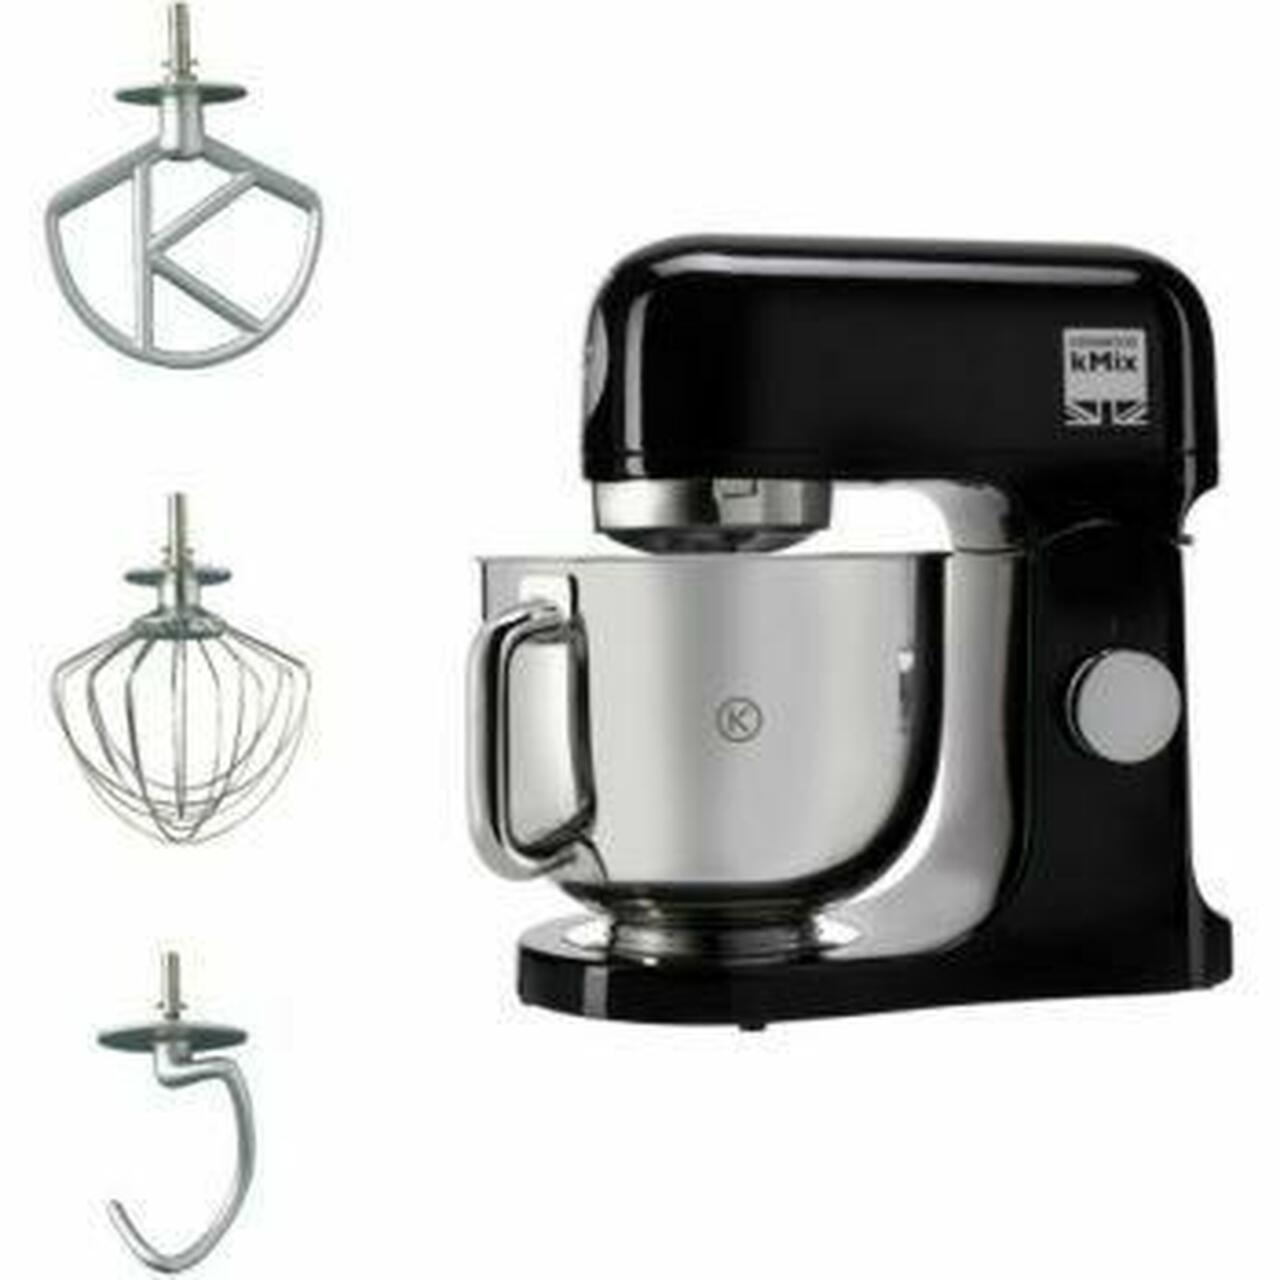 https://tommiekelly.ie/wp-content/uploads/2022/03/kenwood-kenwood-kmix-all-colour-black-stand-mixer-or-kmx750ab__49029.1635582683.jpg